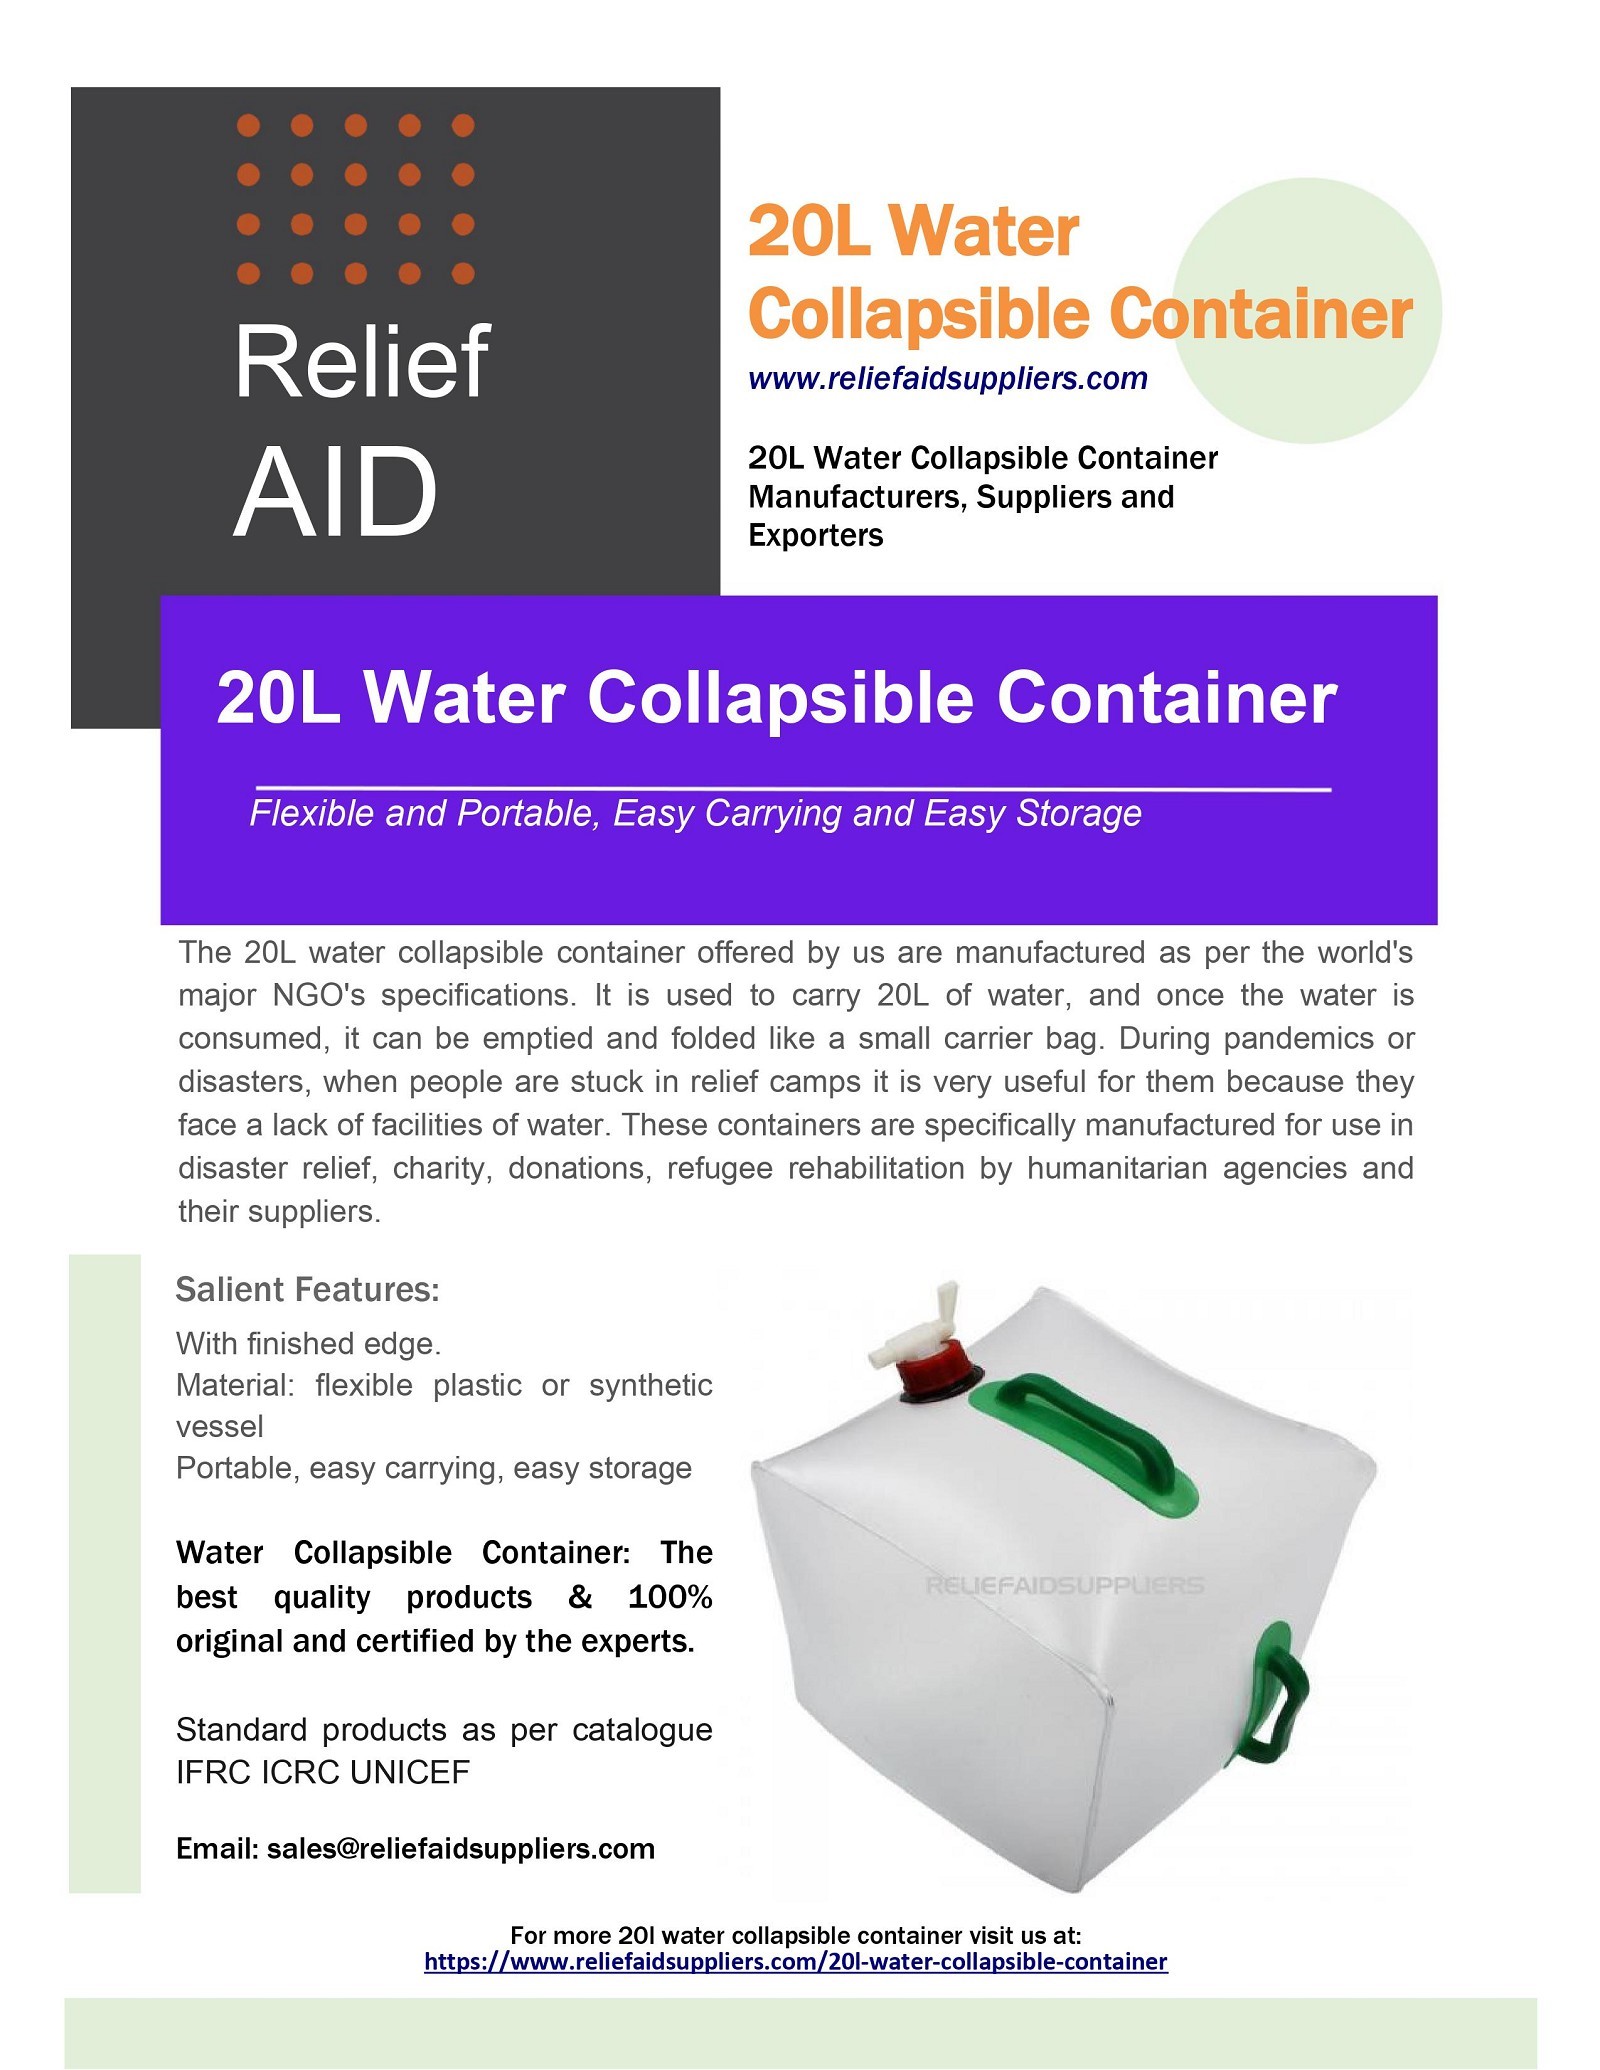 20L Water Collapsible Container Manufacturers